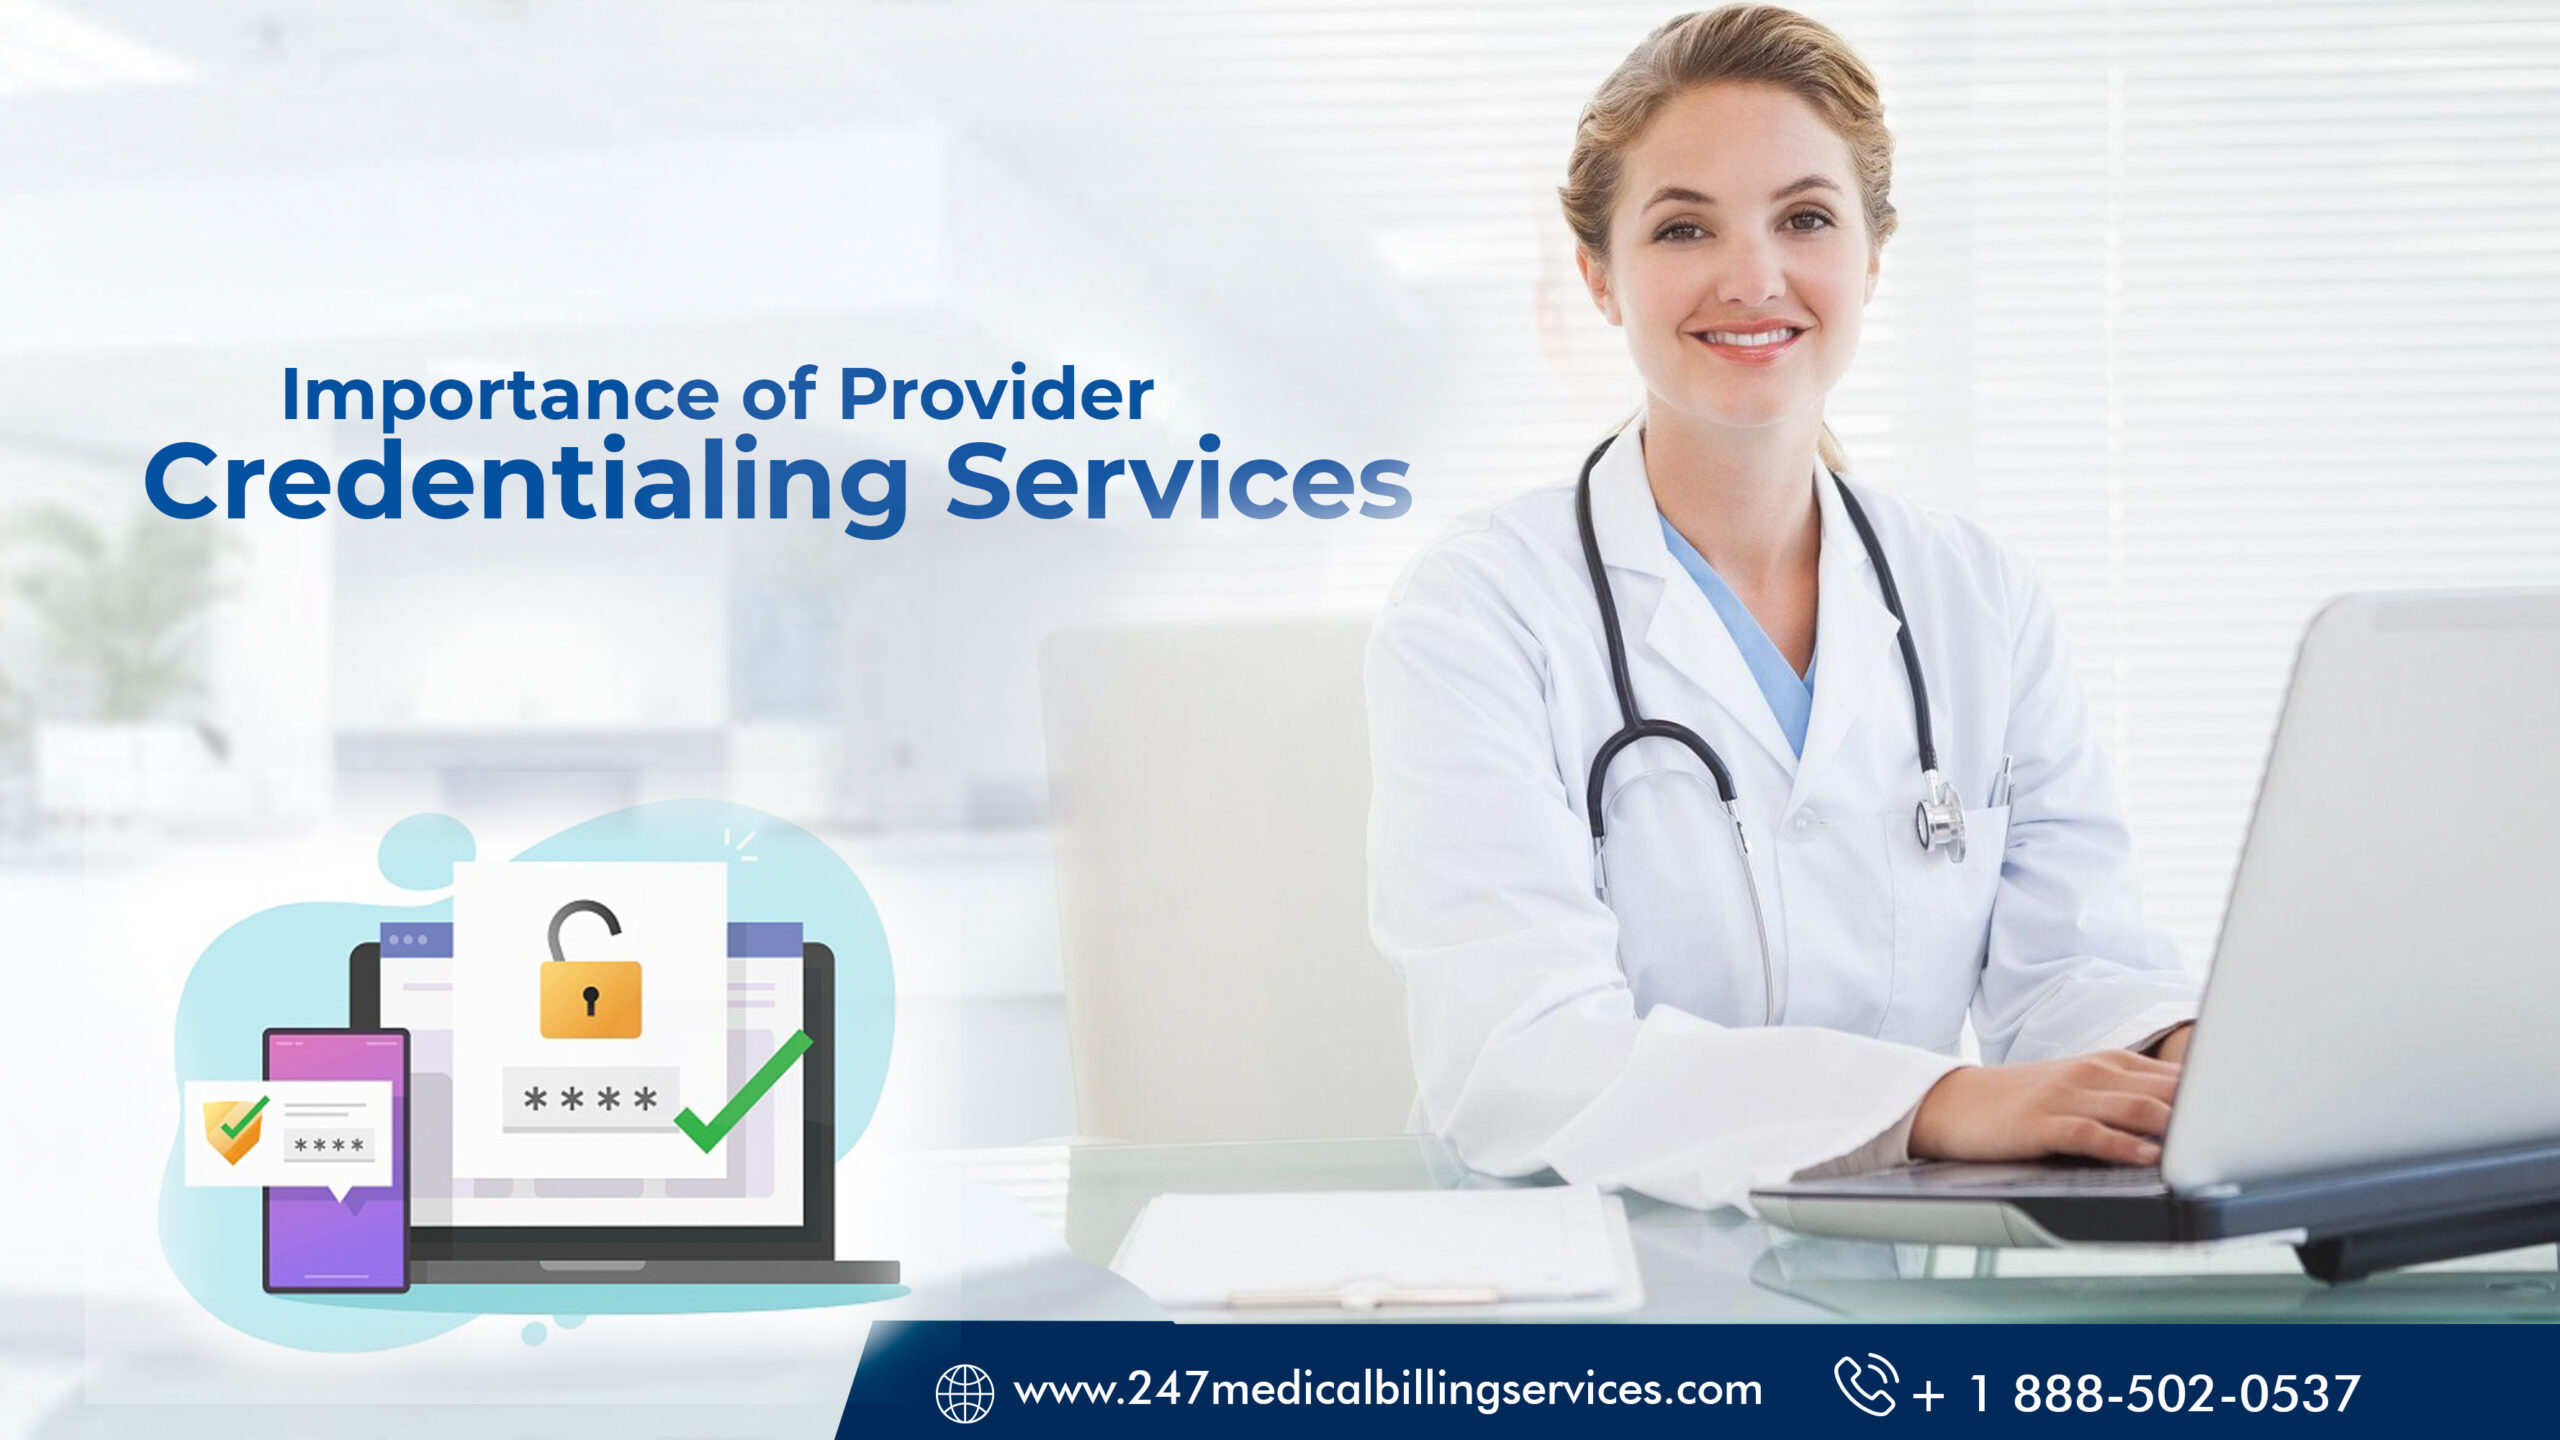  Importance of Provider Credentialing Services